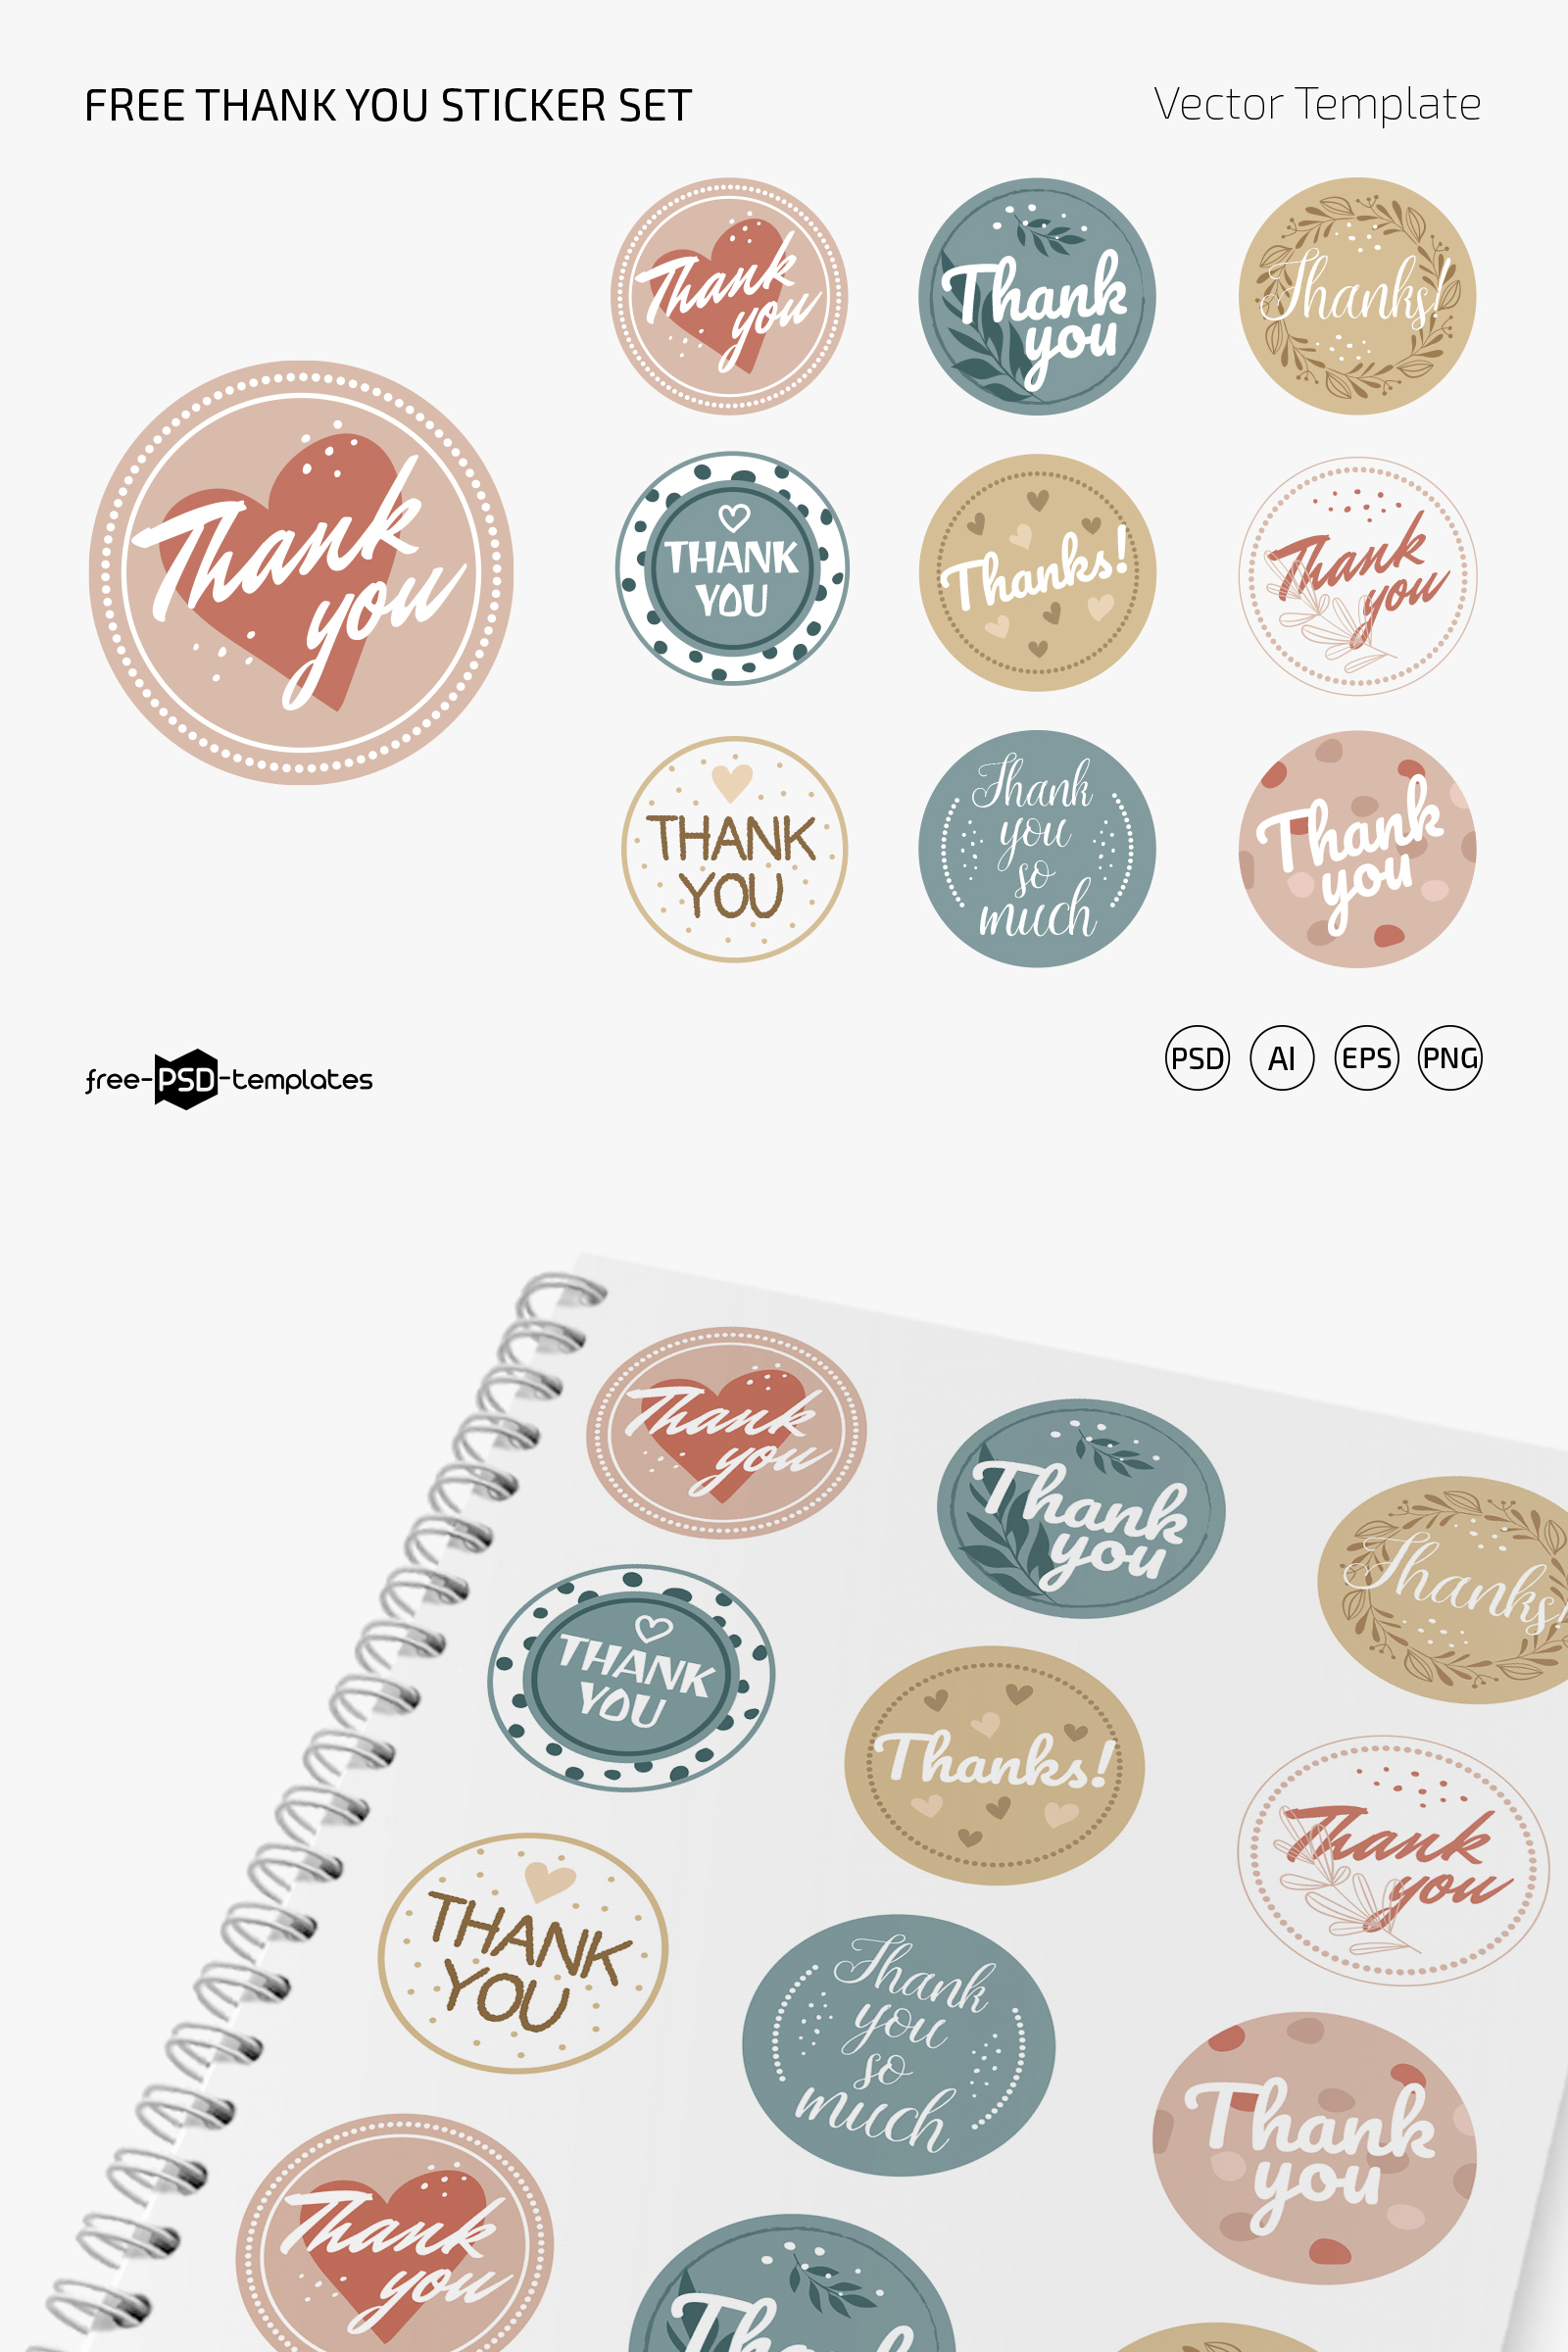 Free Thank You Sticker Template (PSD, AI, EPS, PNG)